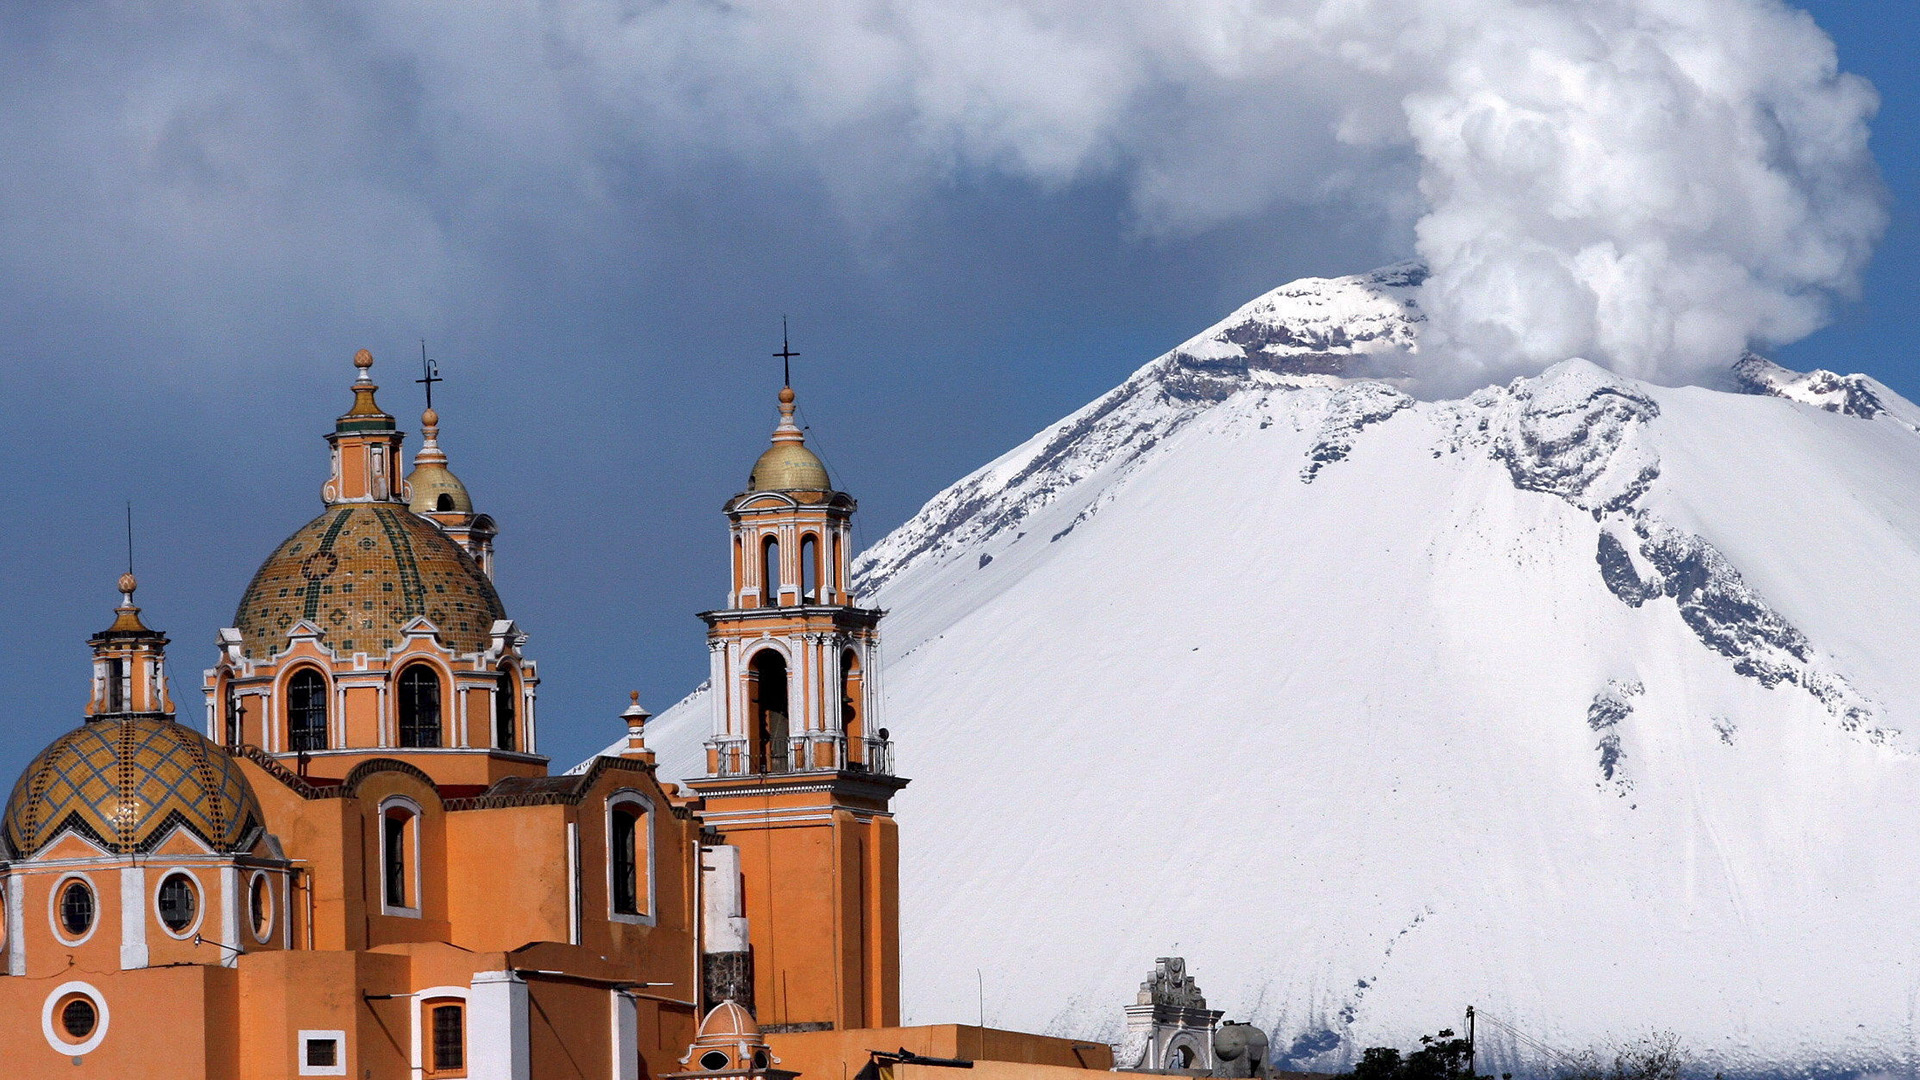 popocatepetl, Volcano, Cholula, Mexico, Eruption, Smoke, Steam, Nature, Mountains, Snow, Architecture, Buildings, Cathedral, Church, Cross Wallpaper